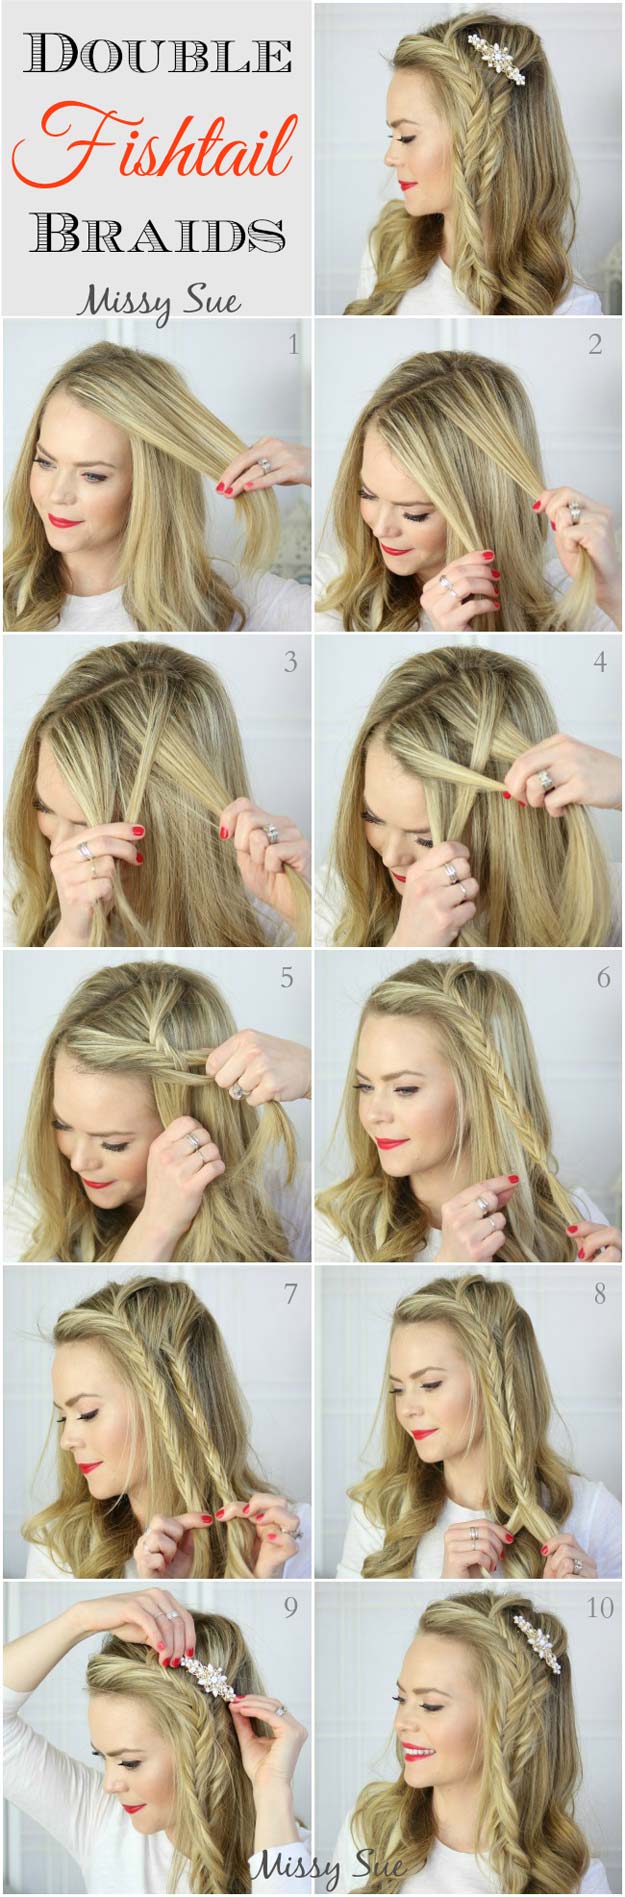 Best Hair Braiding Tutorials - Braid 5-Double Fishtail Braids - Easy Step by Step Tutorials for Braids - How To Braid Fishtail, French Braids, Flower Crown, Side Braids, Cornrows, Updos - Cool Braided Hairstyles for Girls, Teens and Women - School, Day and Evening, Boho, Casual and Formal Looks #hairstyles #braiding #braidingtutorials #diyhair 